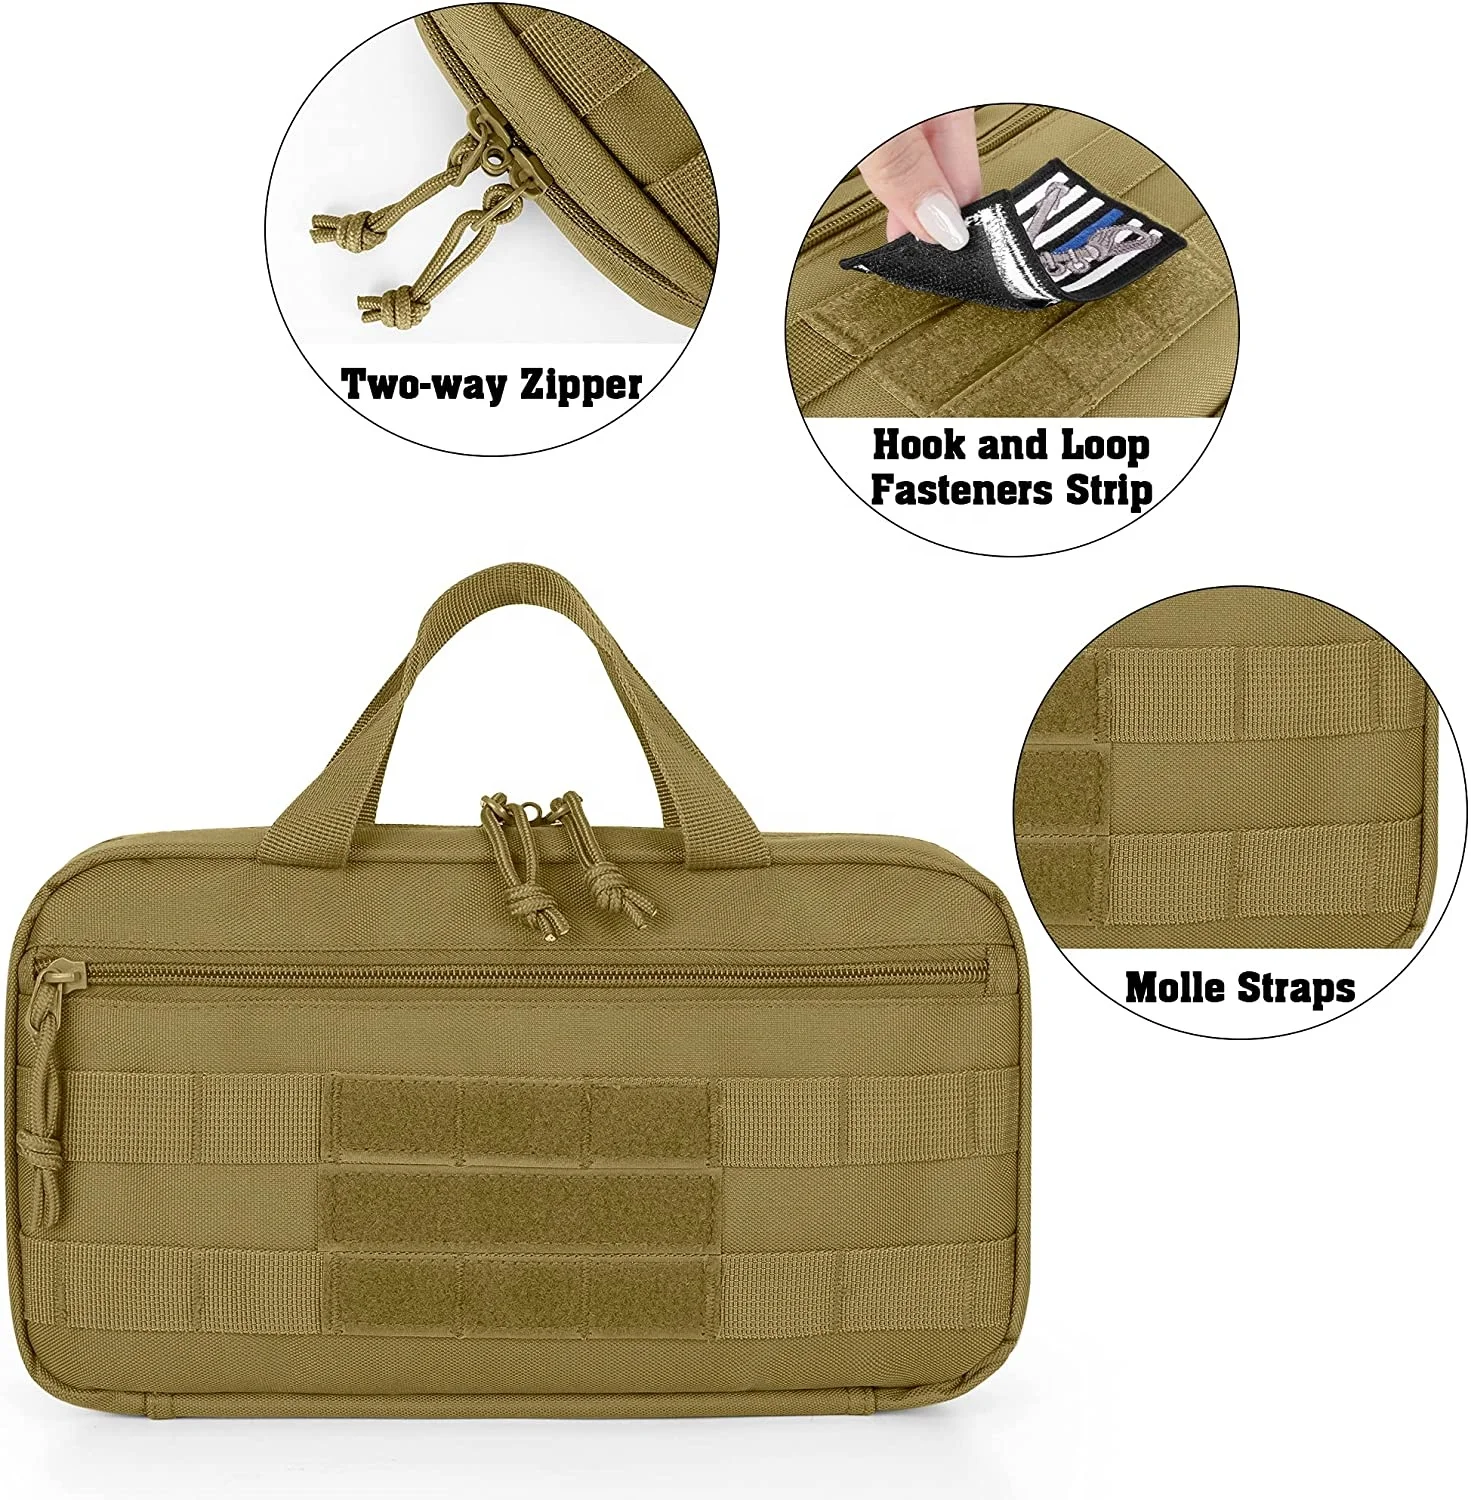 New Design Tactical Magazine Storage Bag Handgun Magazine Carrier Concealed Mag Pouch Holder With Molly System